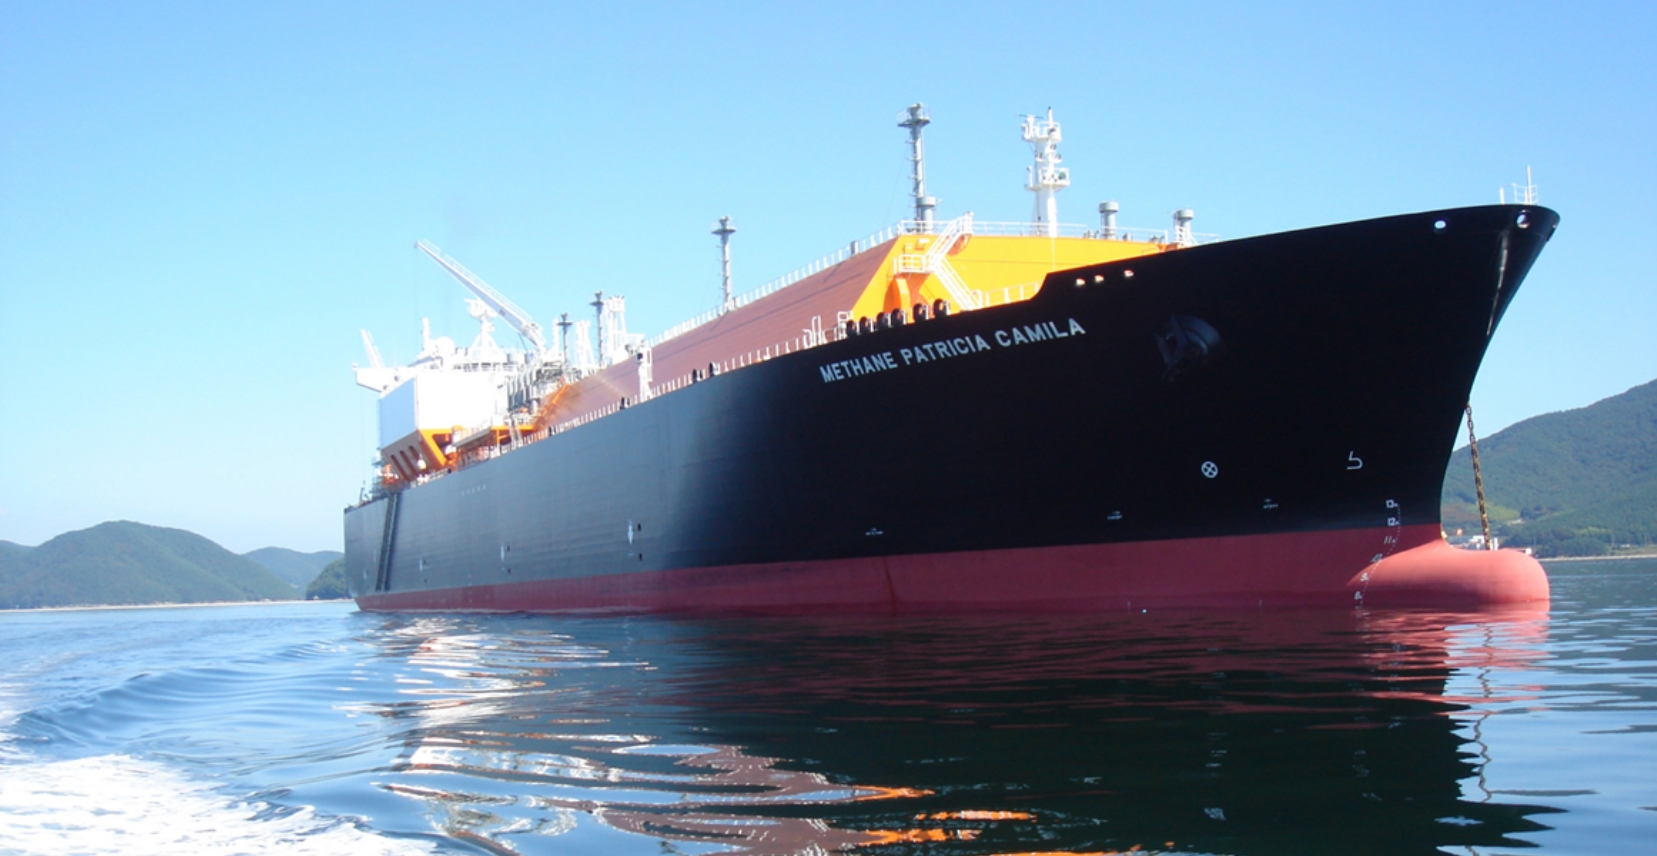 Silverstream Technologies and Shell successfully complete trials of the Silverstream® System onboard the LNG carrier Methane Patricia Camila